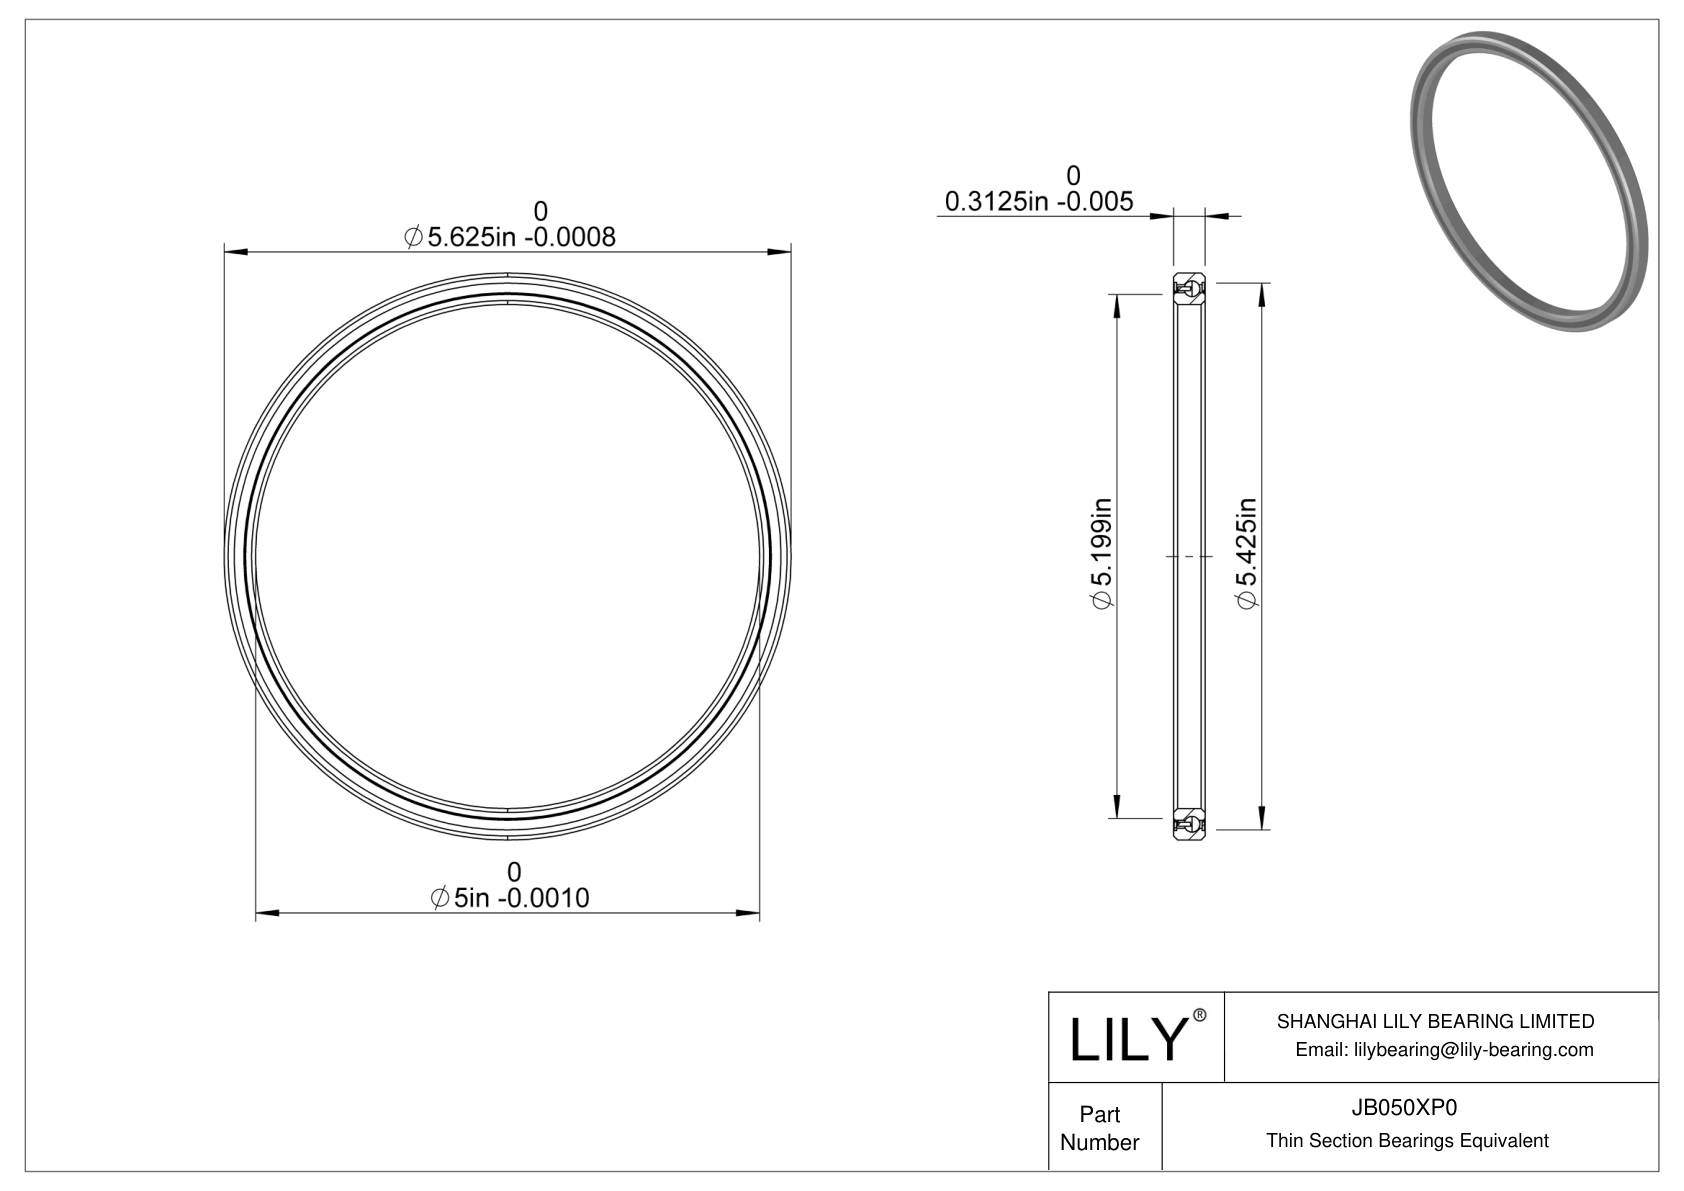 JB050XP0 Constant Section (CS) Bearings cad drawing